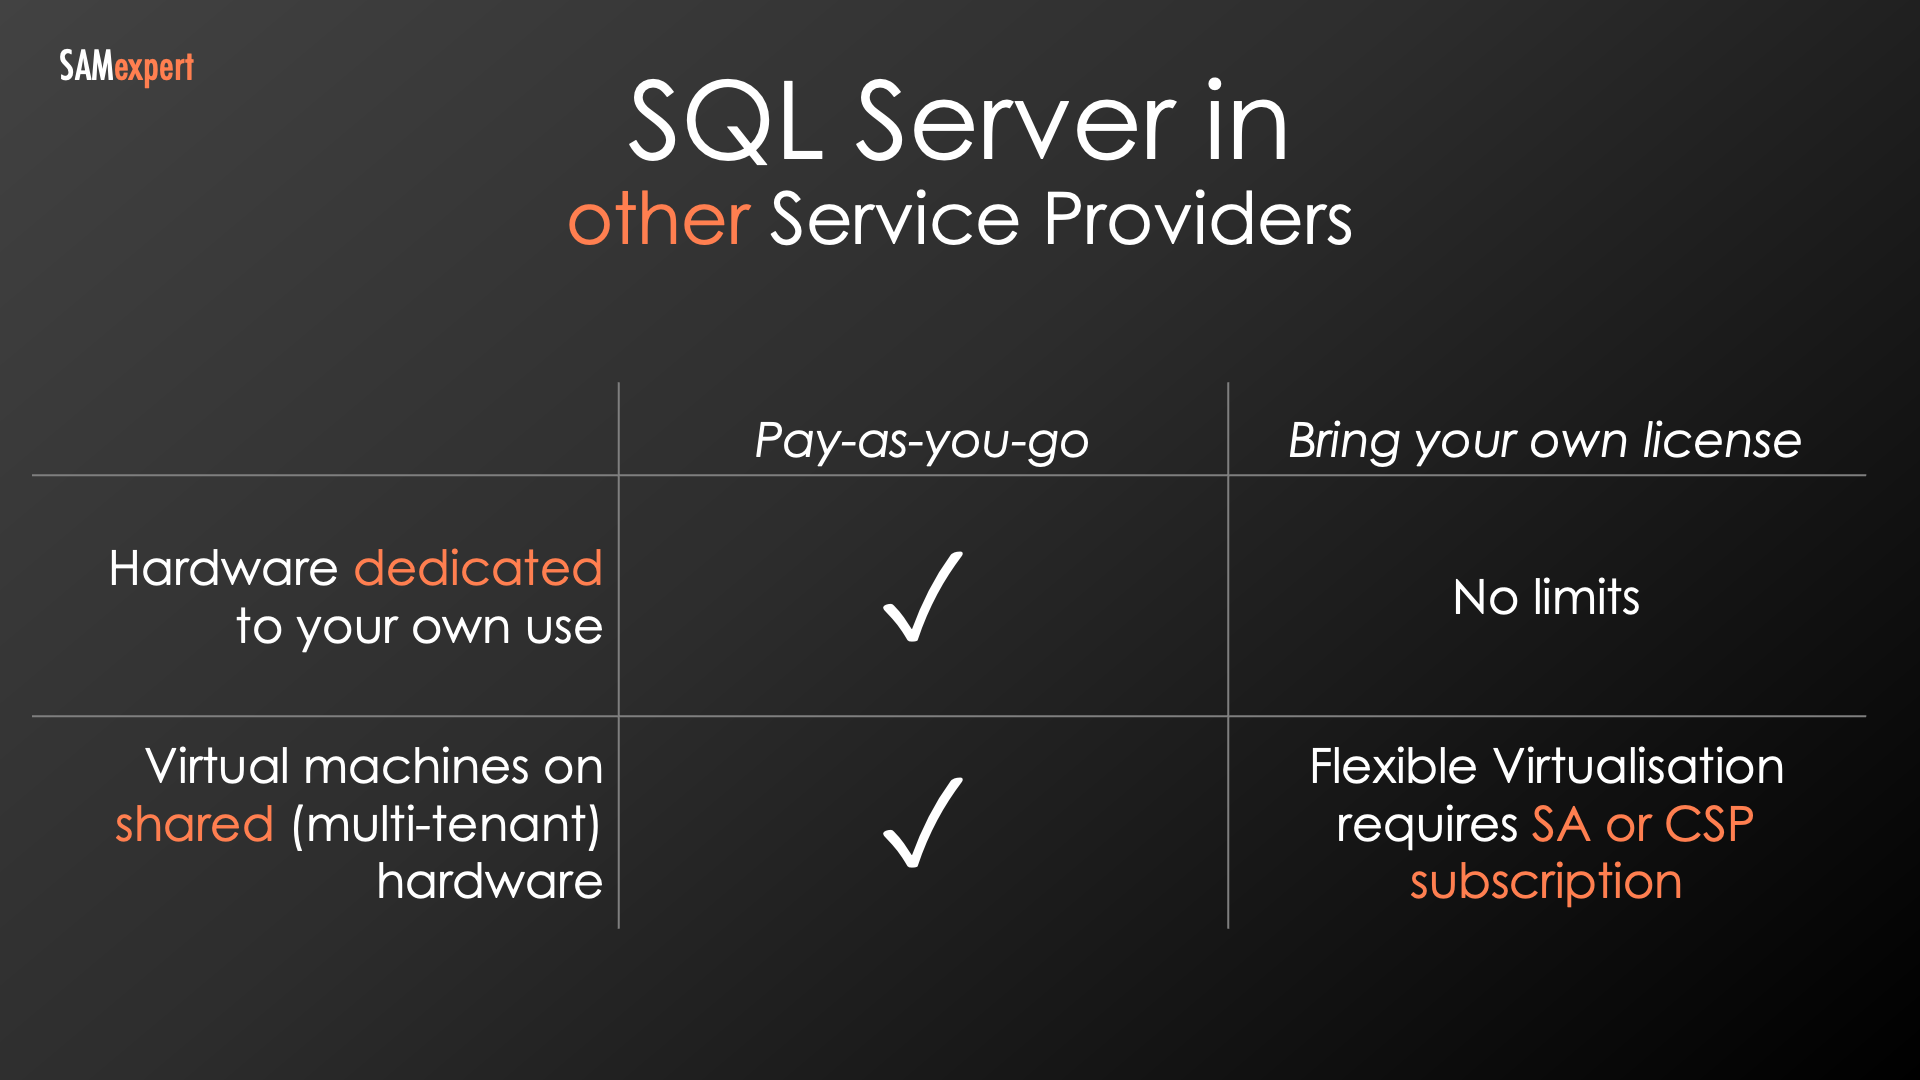 SQL Server Bring Your Own Licence (BYOL): All Other Providers